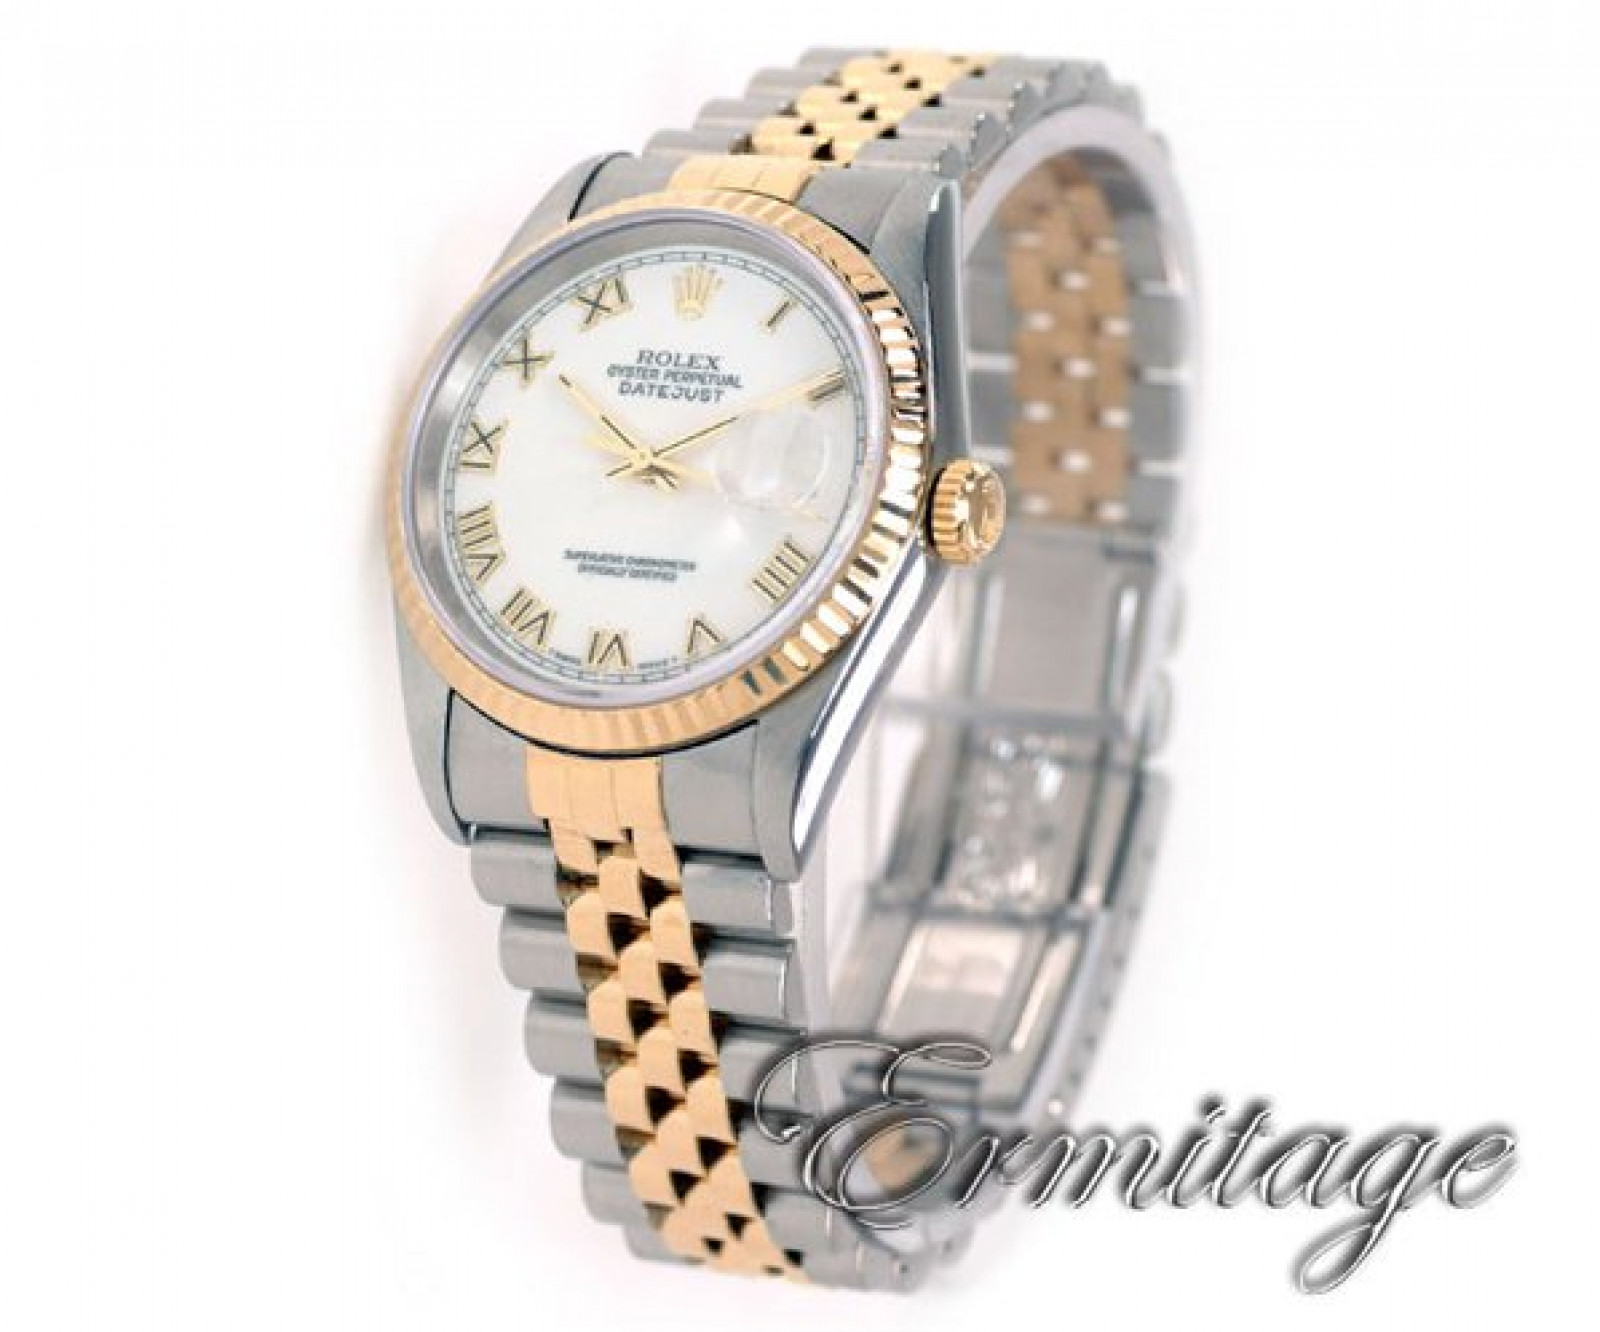 Sell Rolex Datejust 16233 For Best Price